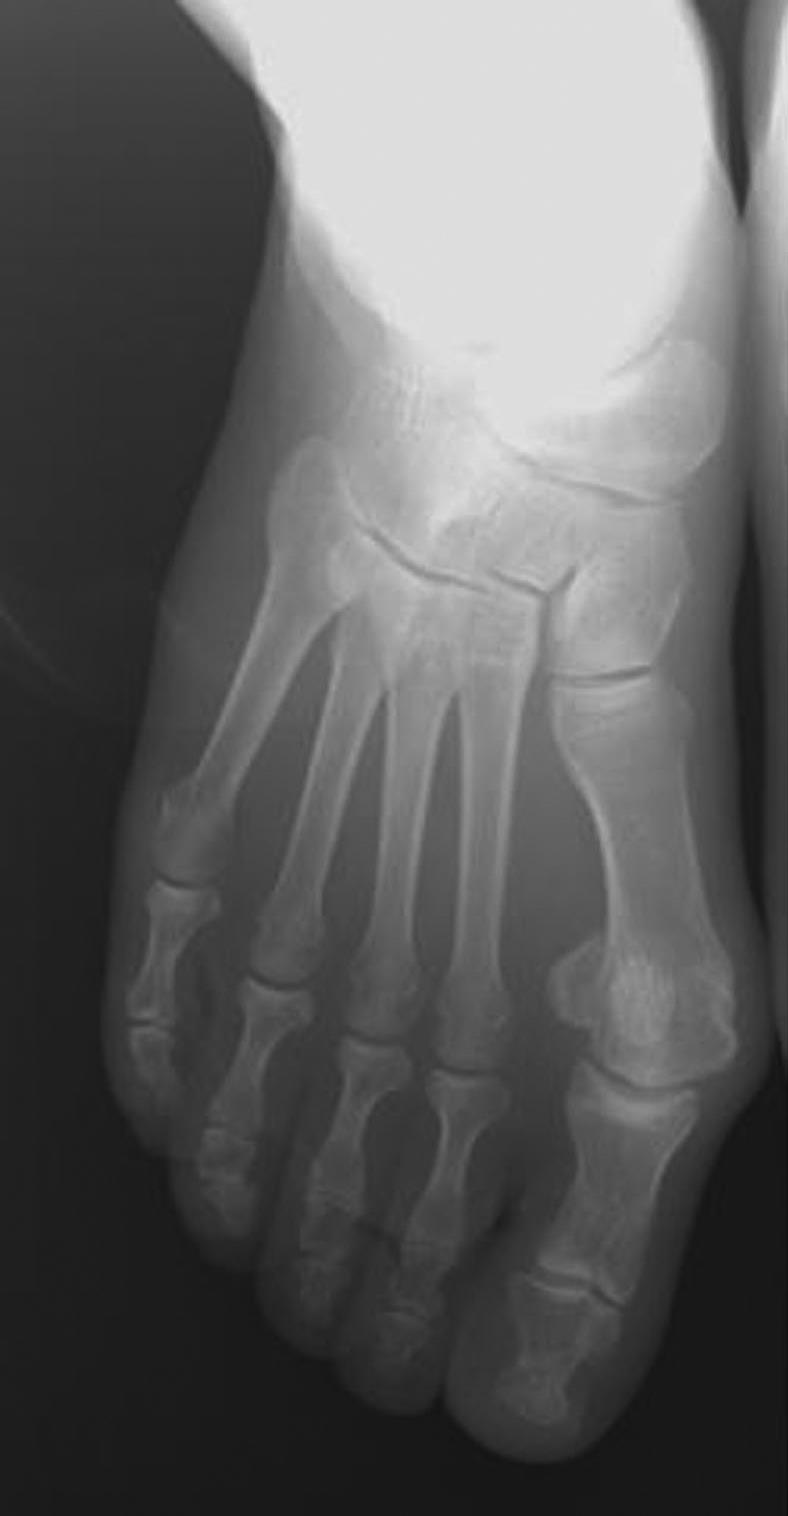 In this study, a proximal chevron osteotomy was performed in patients with severe hallux valgus deformity in whom the first-second IMA was 20º or higher.